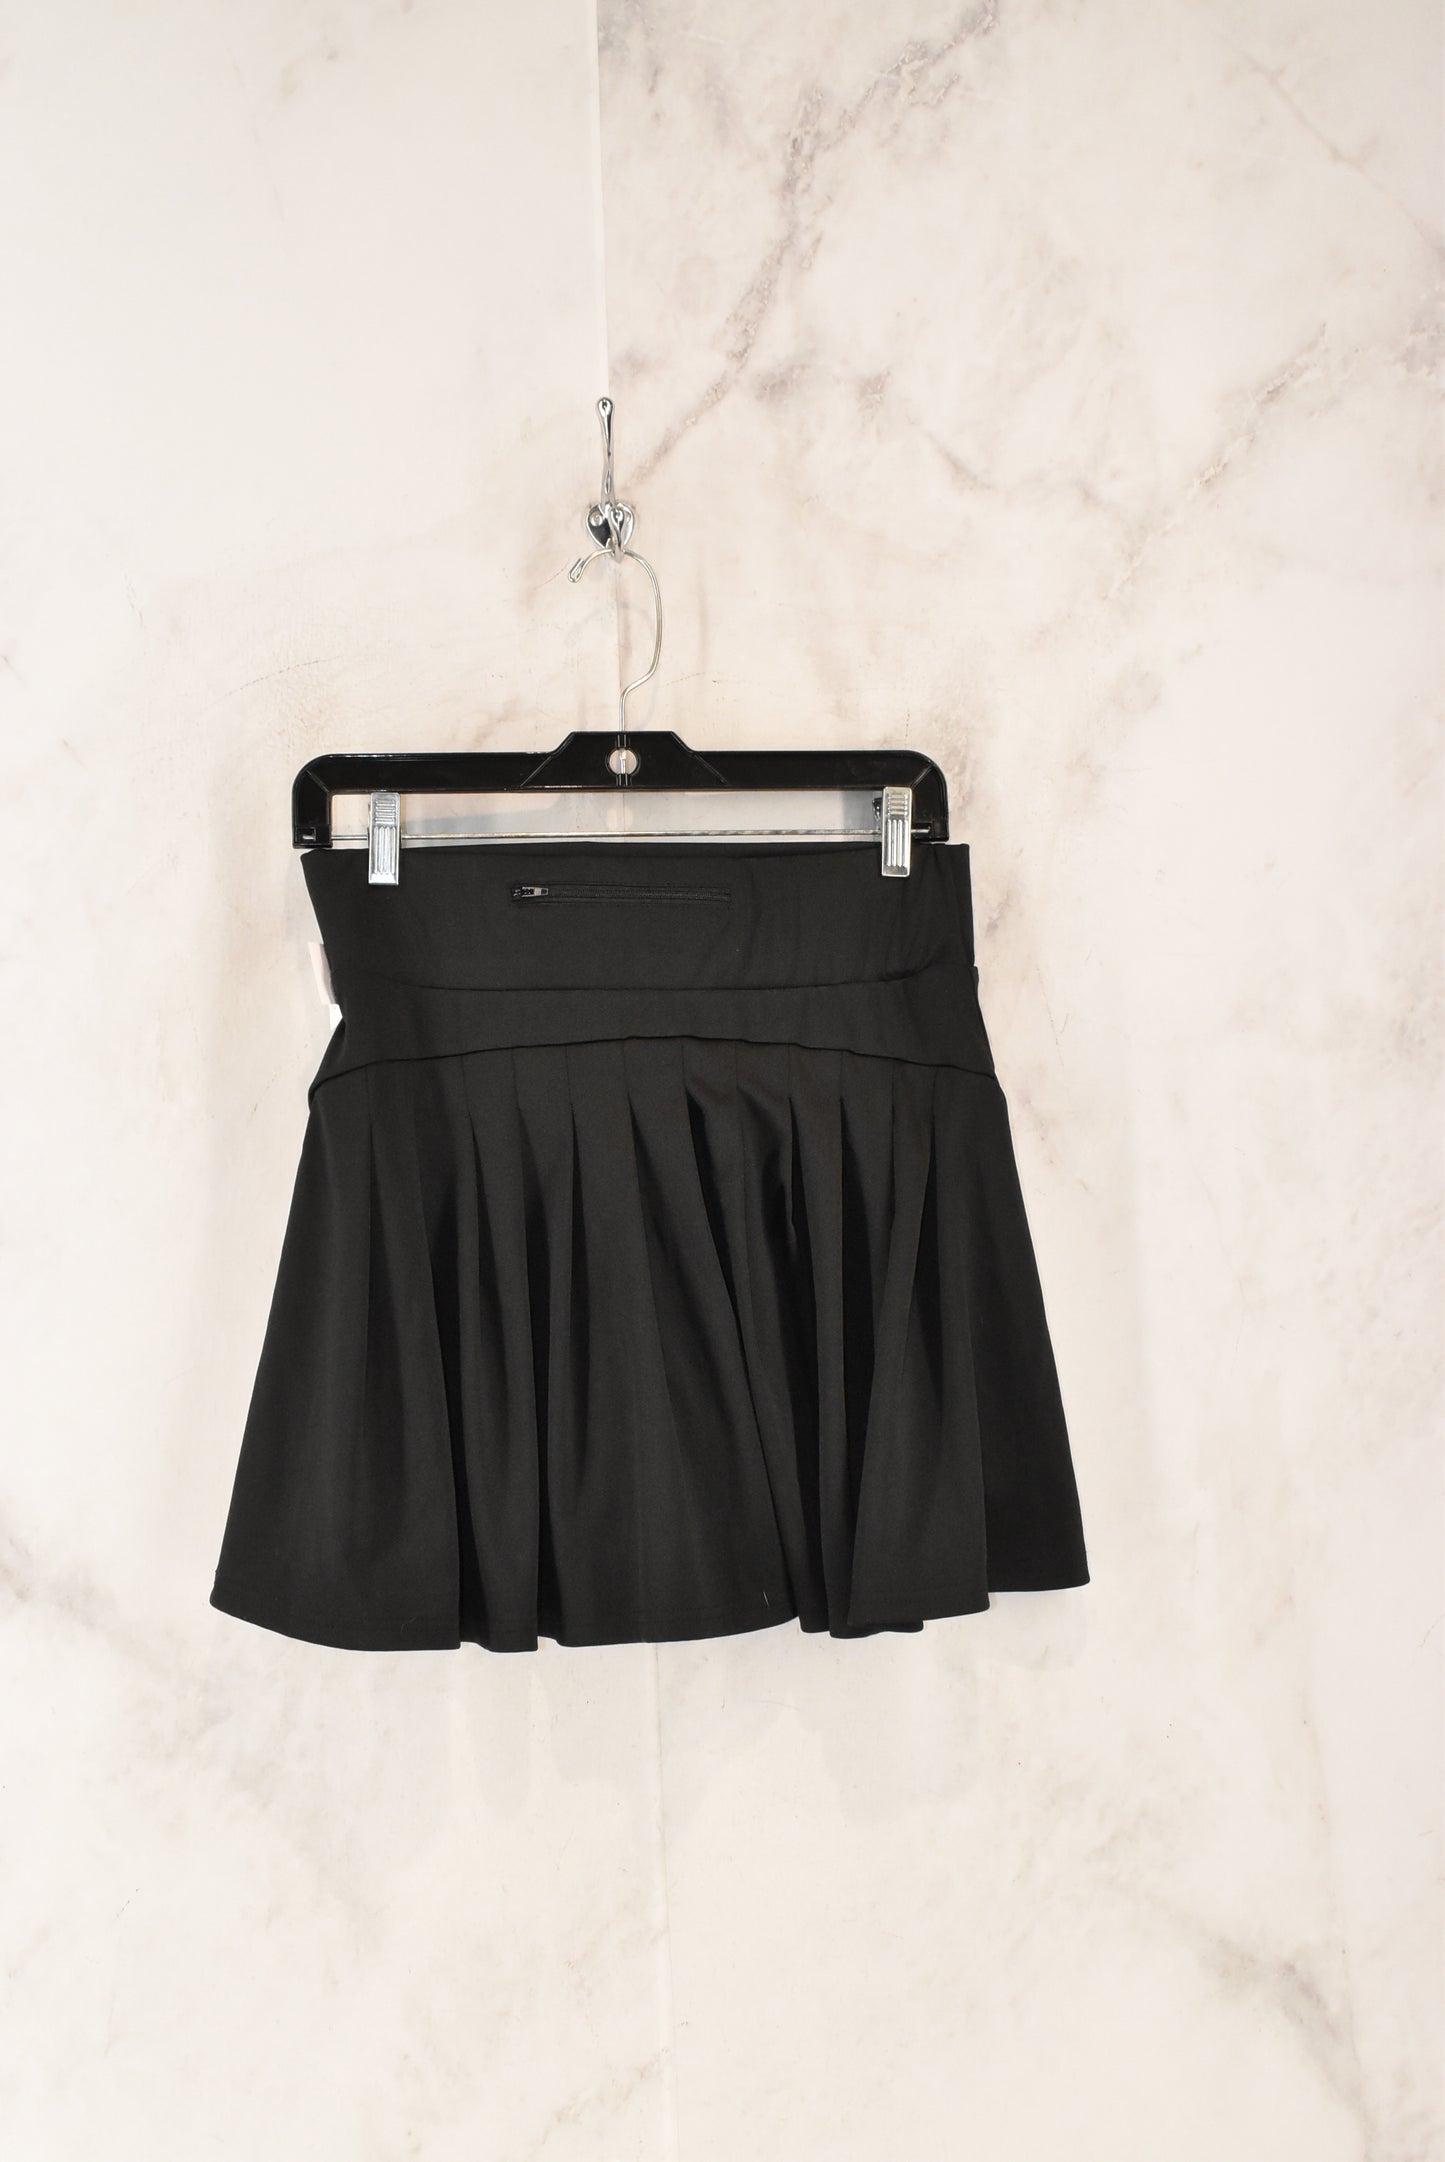 Athletic Skirt Skort By Clothes Mentor  Size: Xl